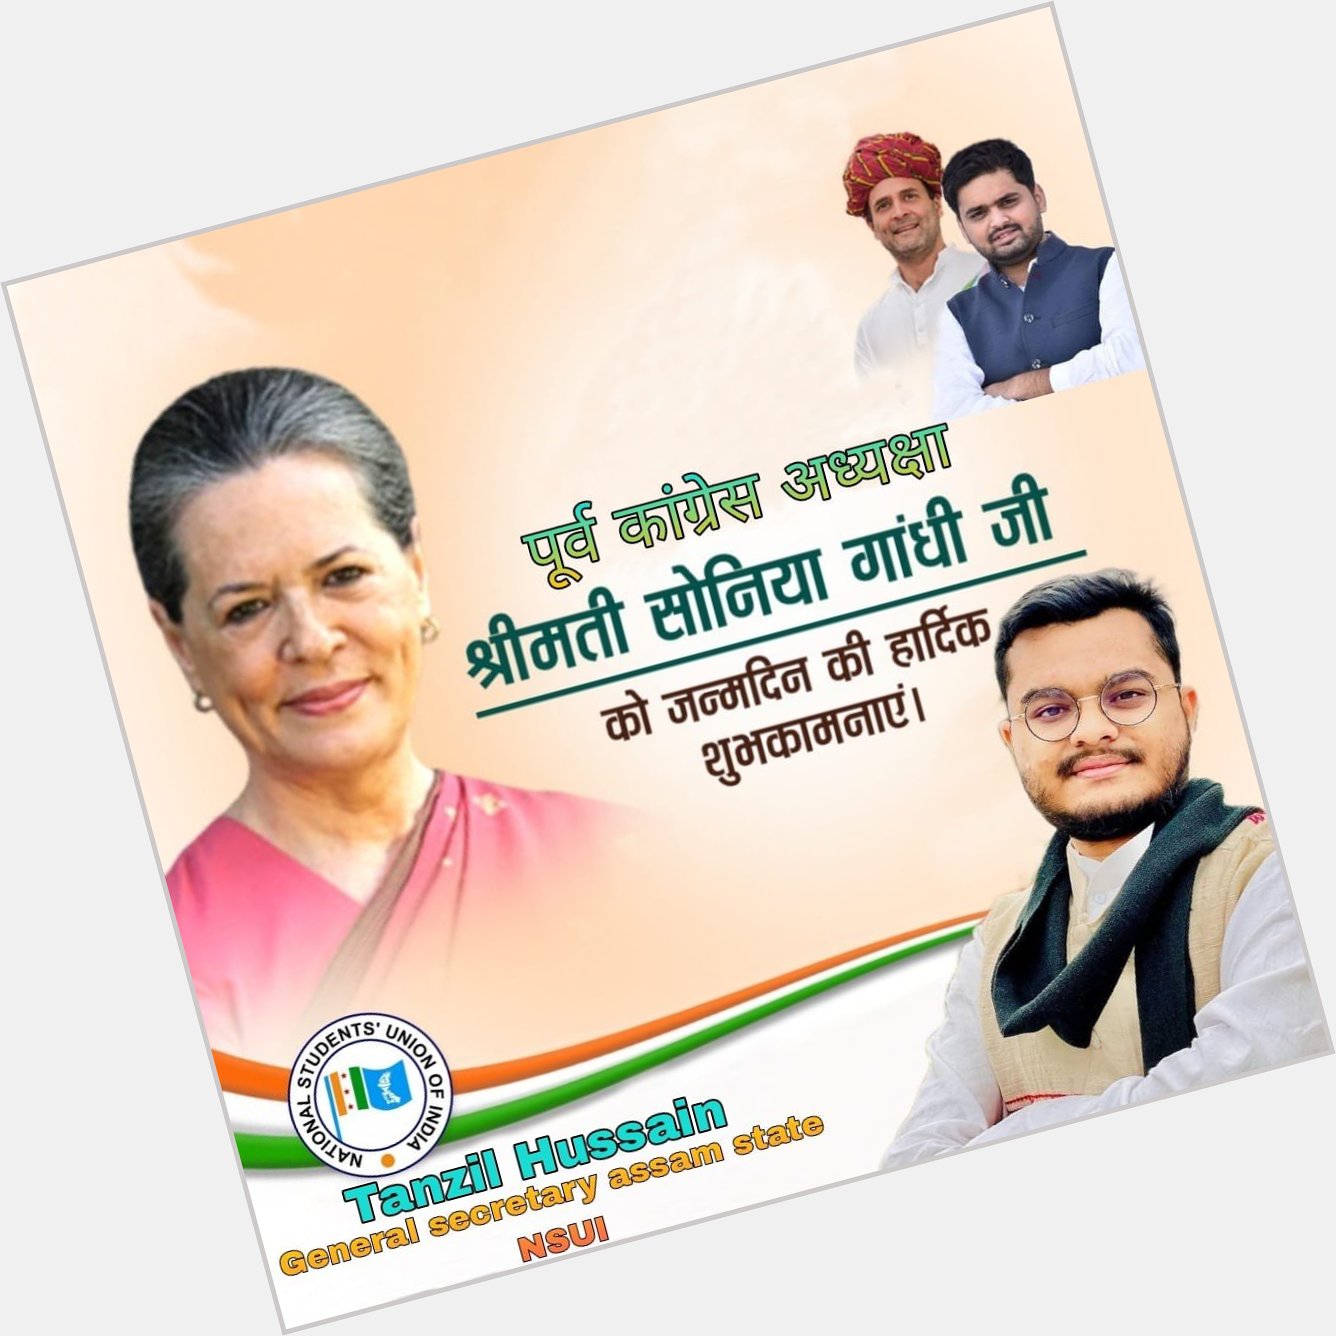 Wishing our Former Congress President and Chairperson UPA Sonia Gandhi ji . Happy birthday. 